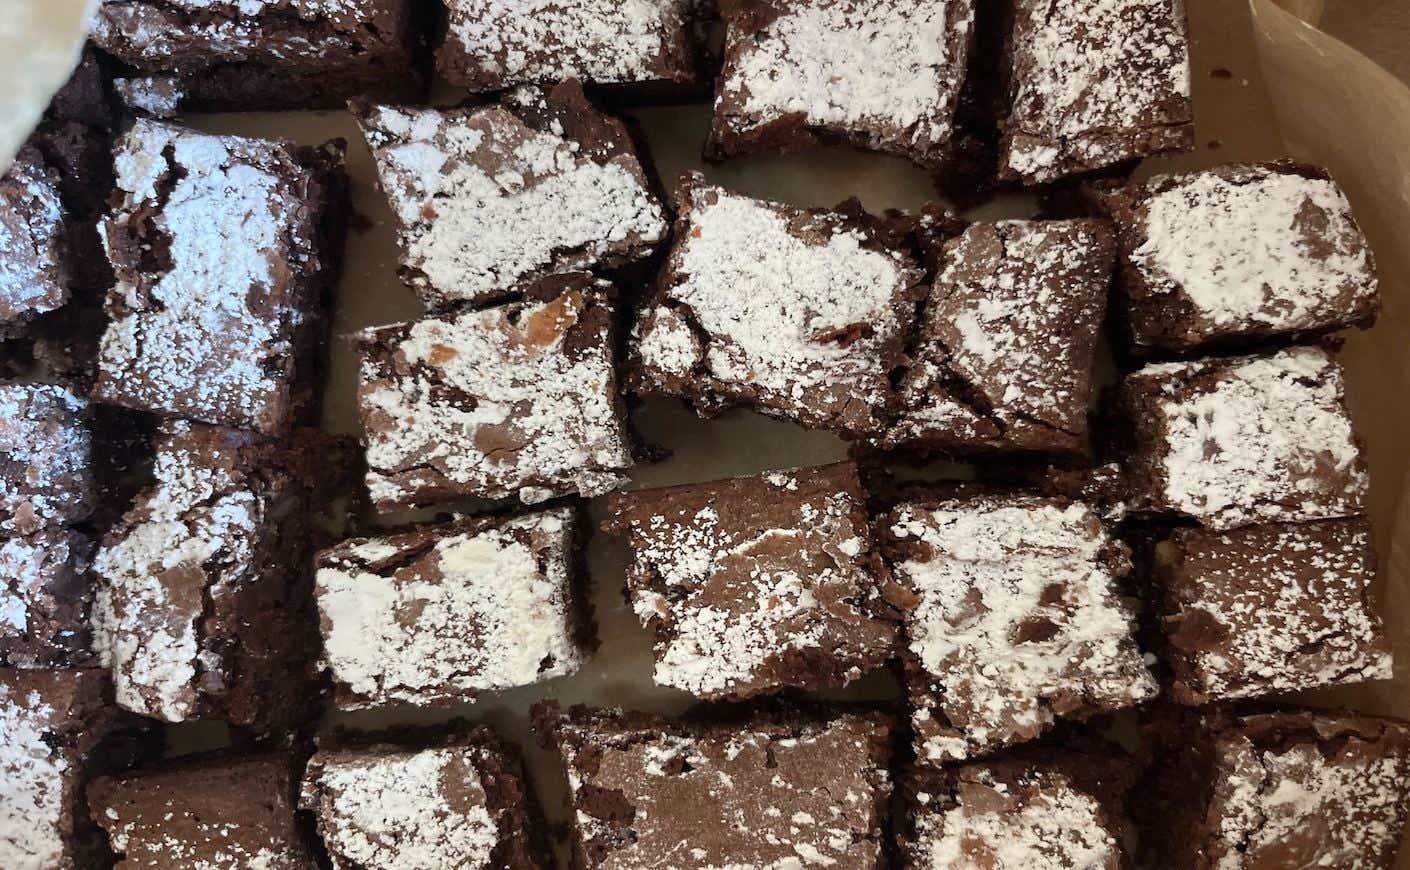 A tray of cooked brownies sprinkled with confectioner's sugar.